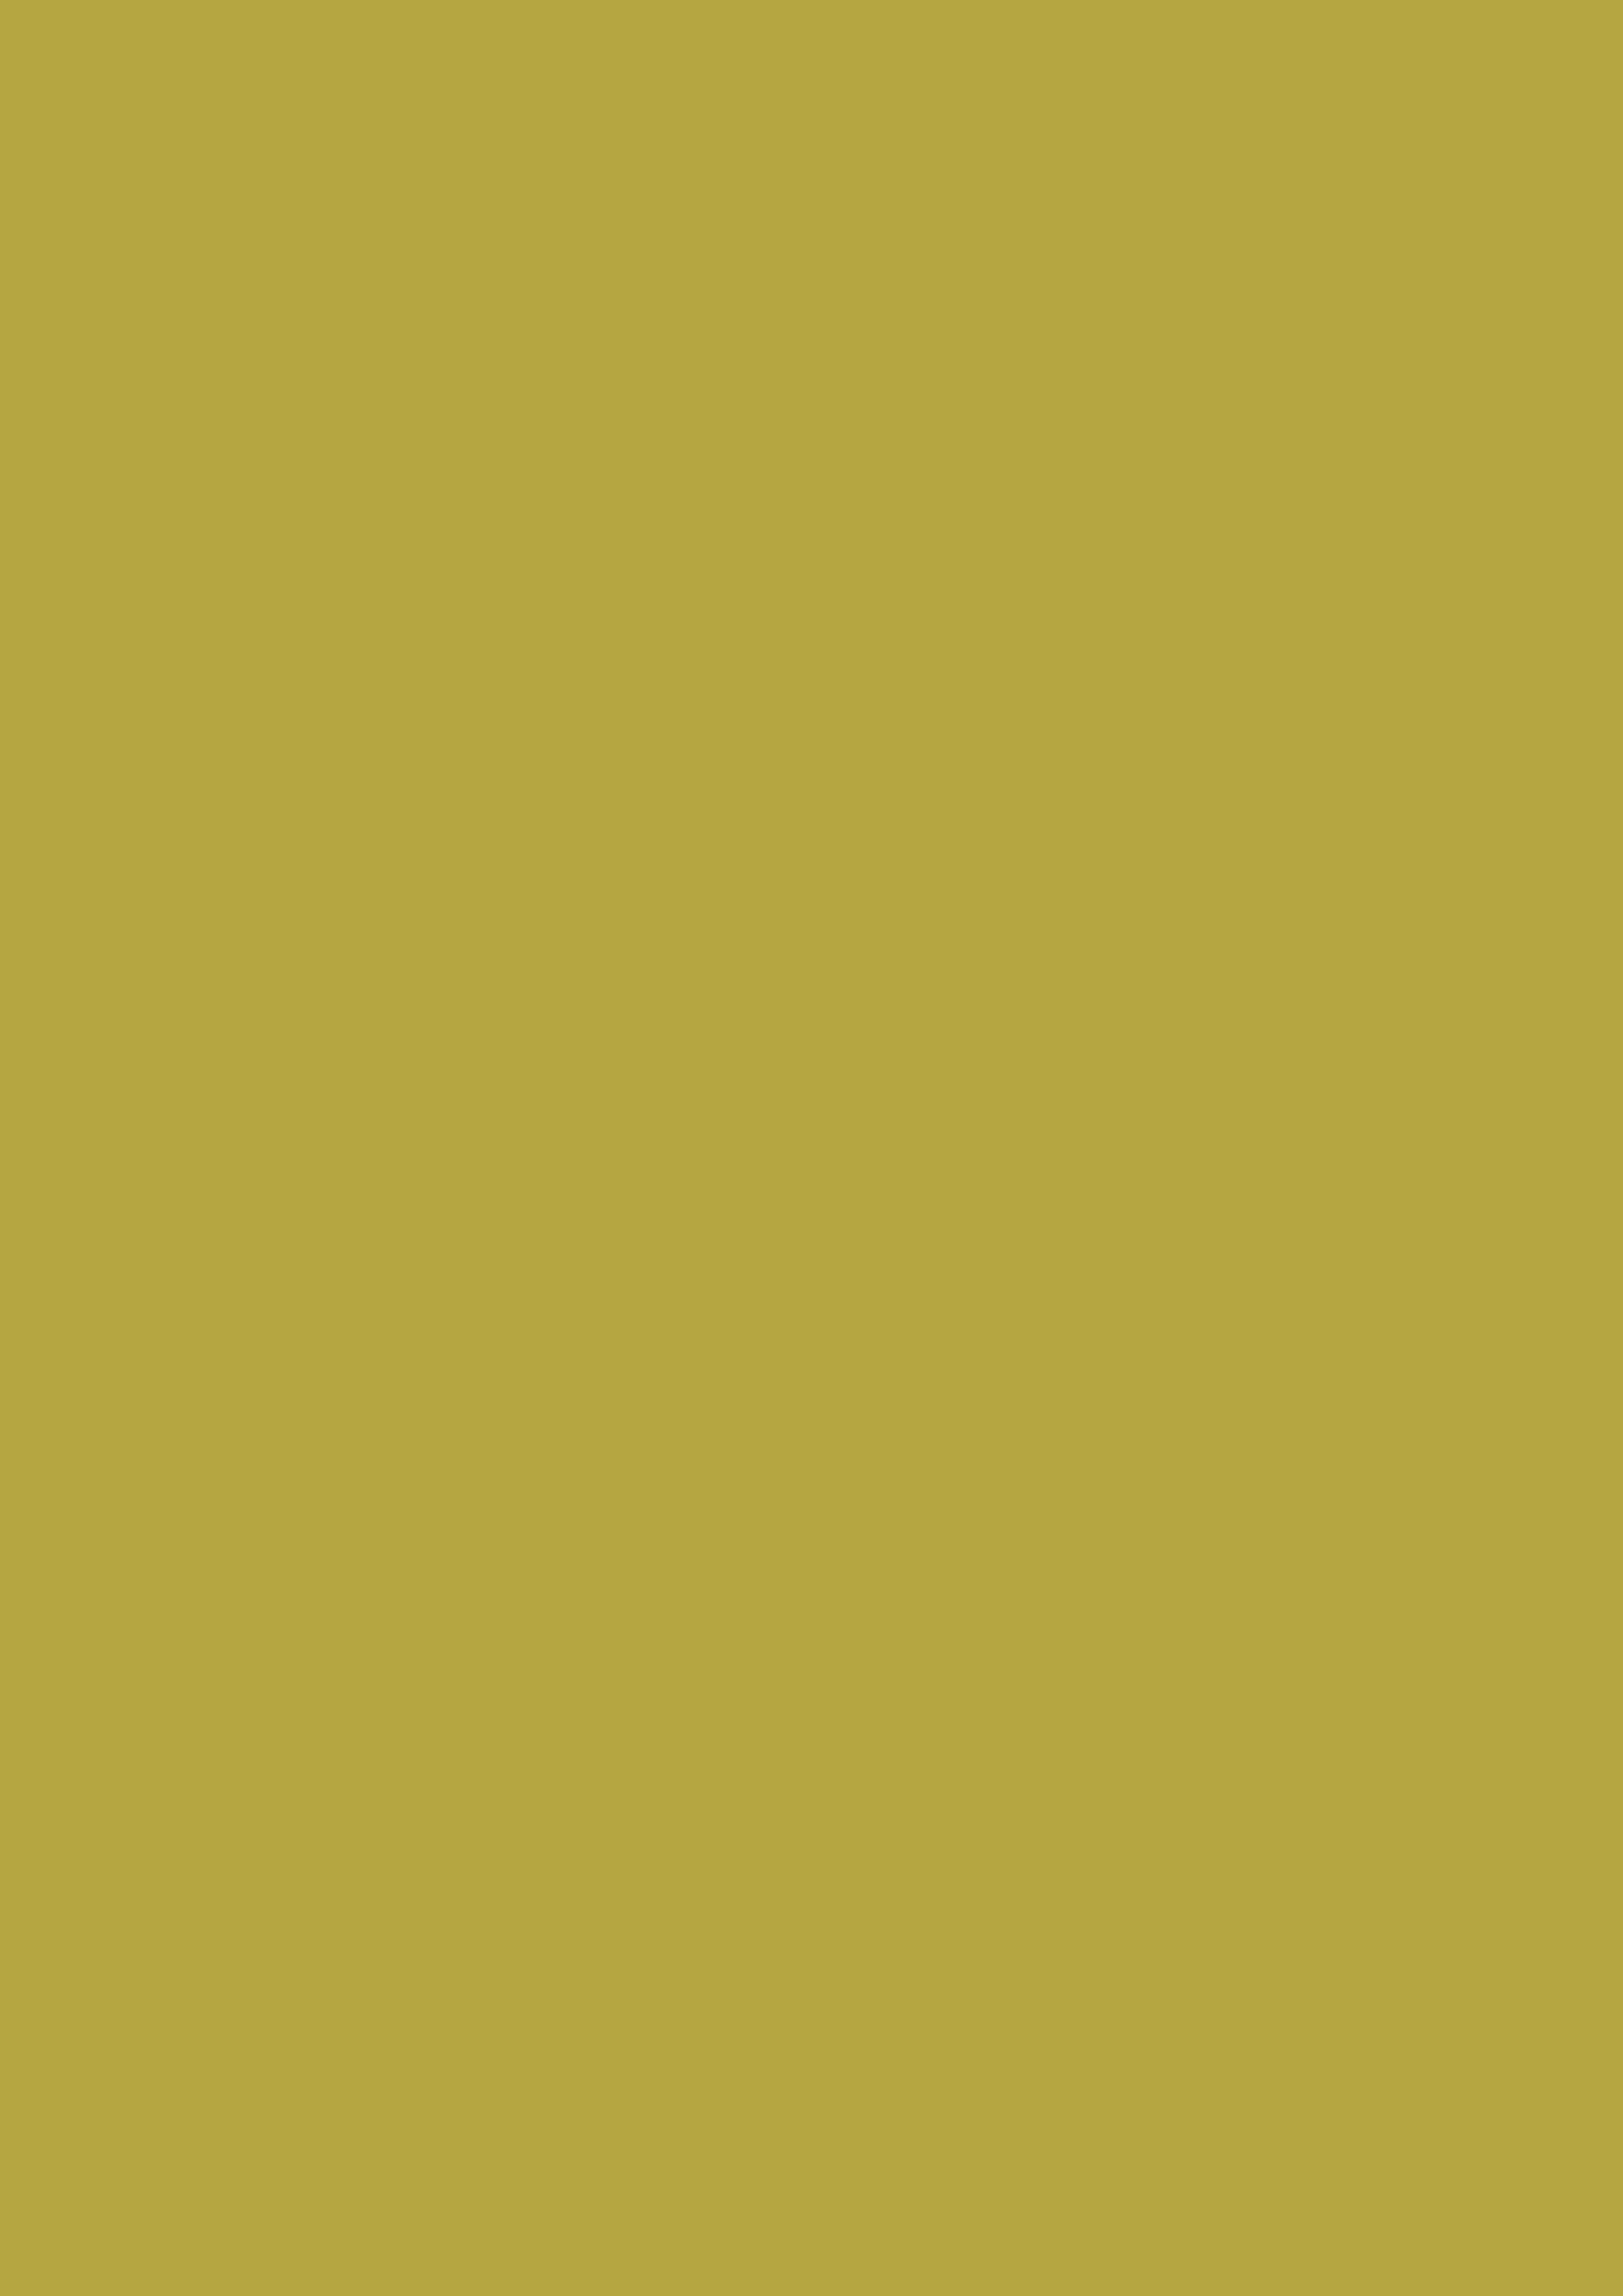 2480x3508 Brass Solid Color Background